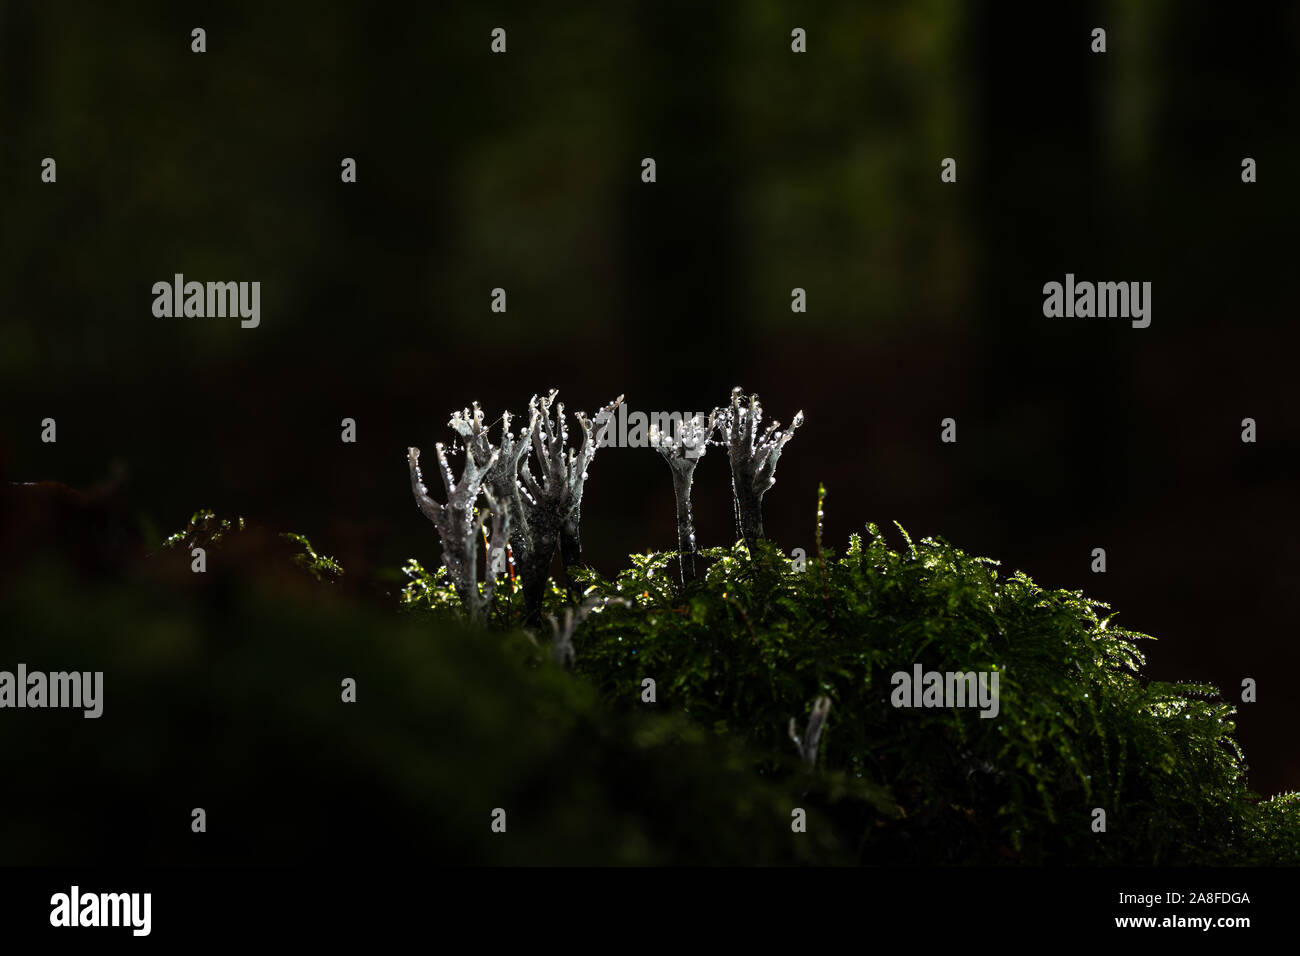 This white or greyish fungus is usually between 2 and 5 cm high, and soon becomes flattened and antler like in appearance, the upper branches powdered Stock Photo